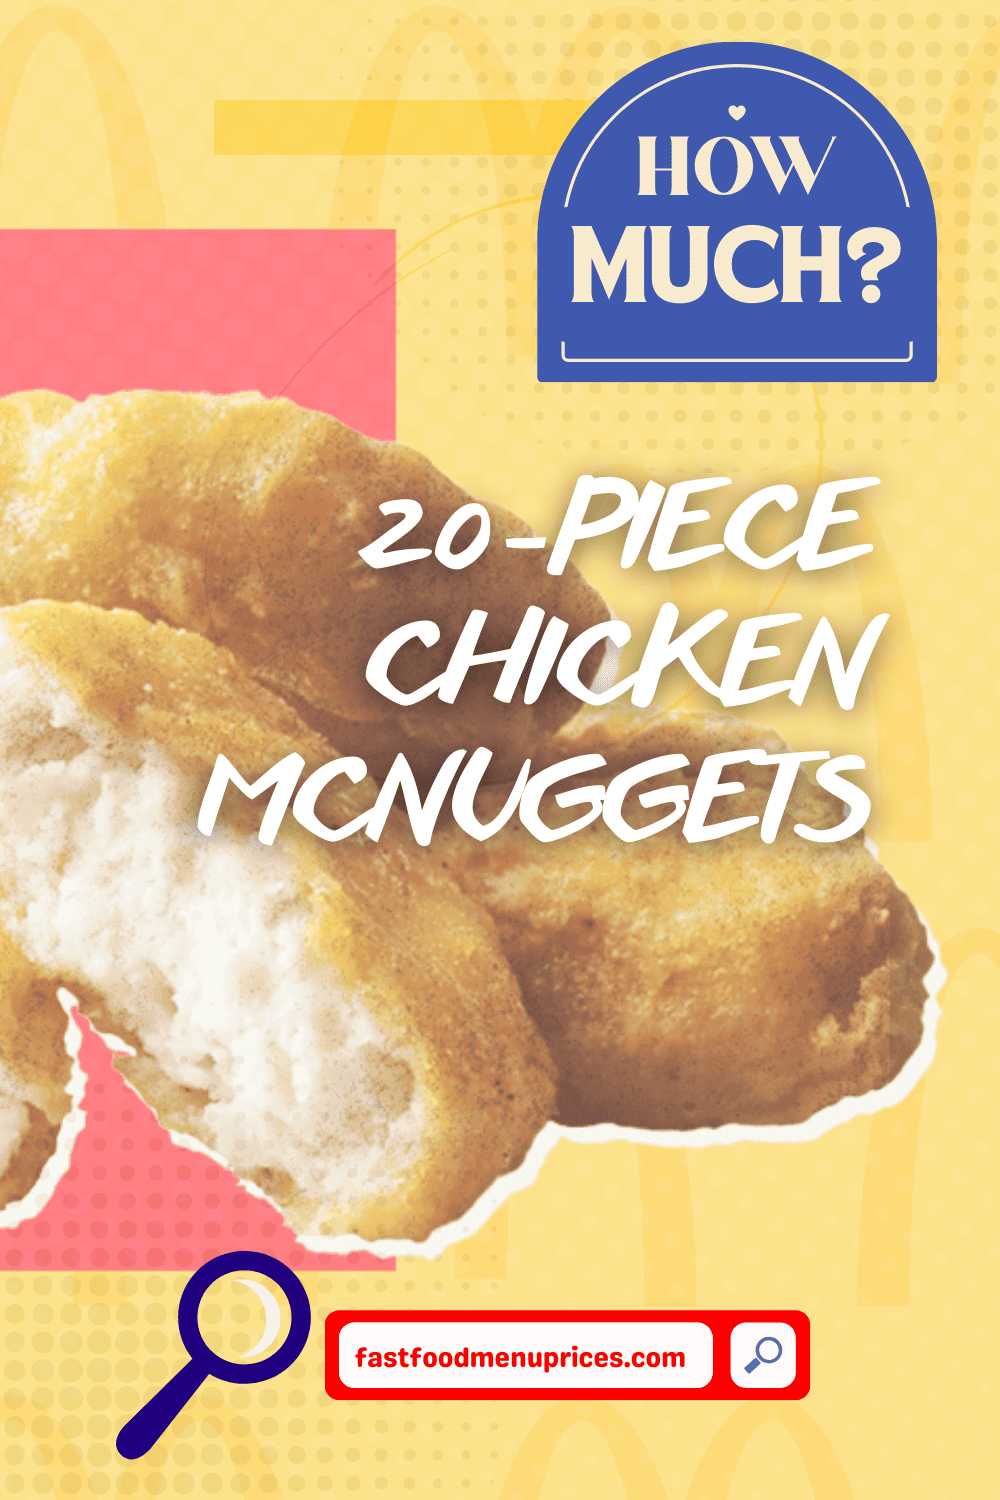 How much do 20 piece chicken mcnuggets from McDonald's cost?